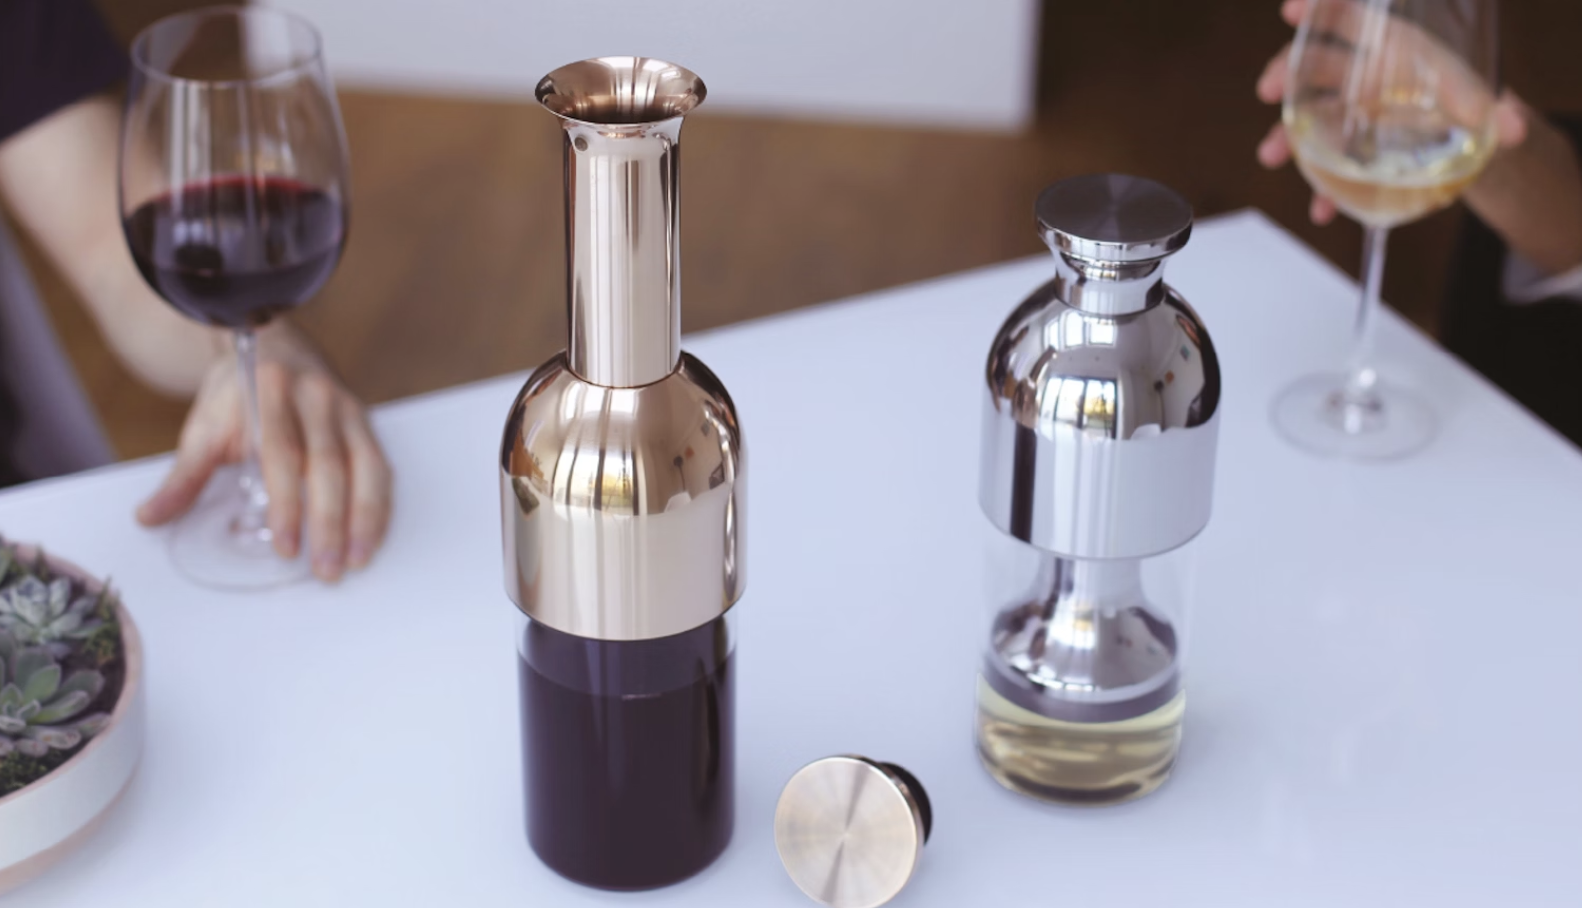 Eto Wine Decanter Review: A Comprehensive Look at Its Features and Benefits